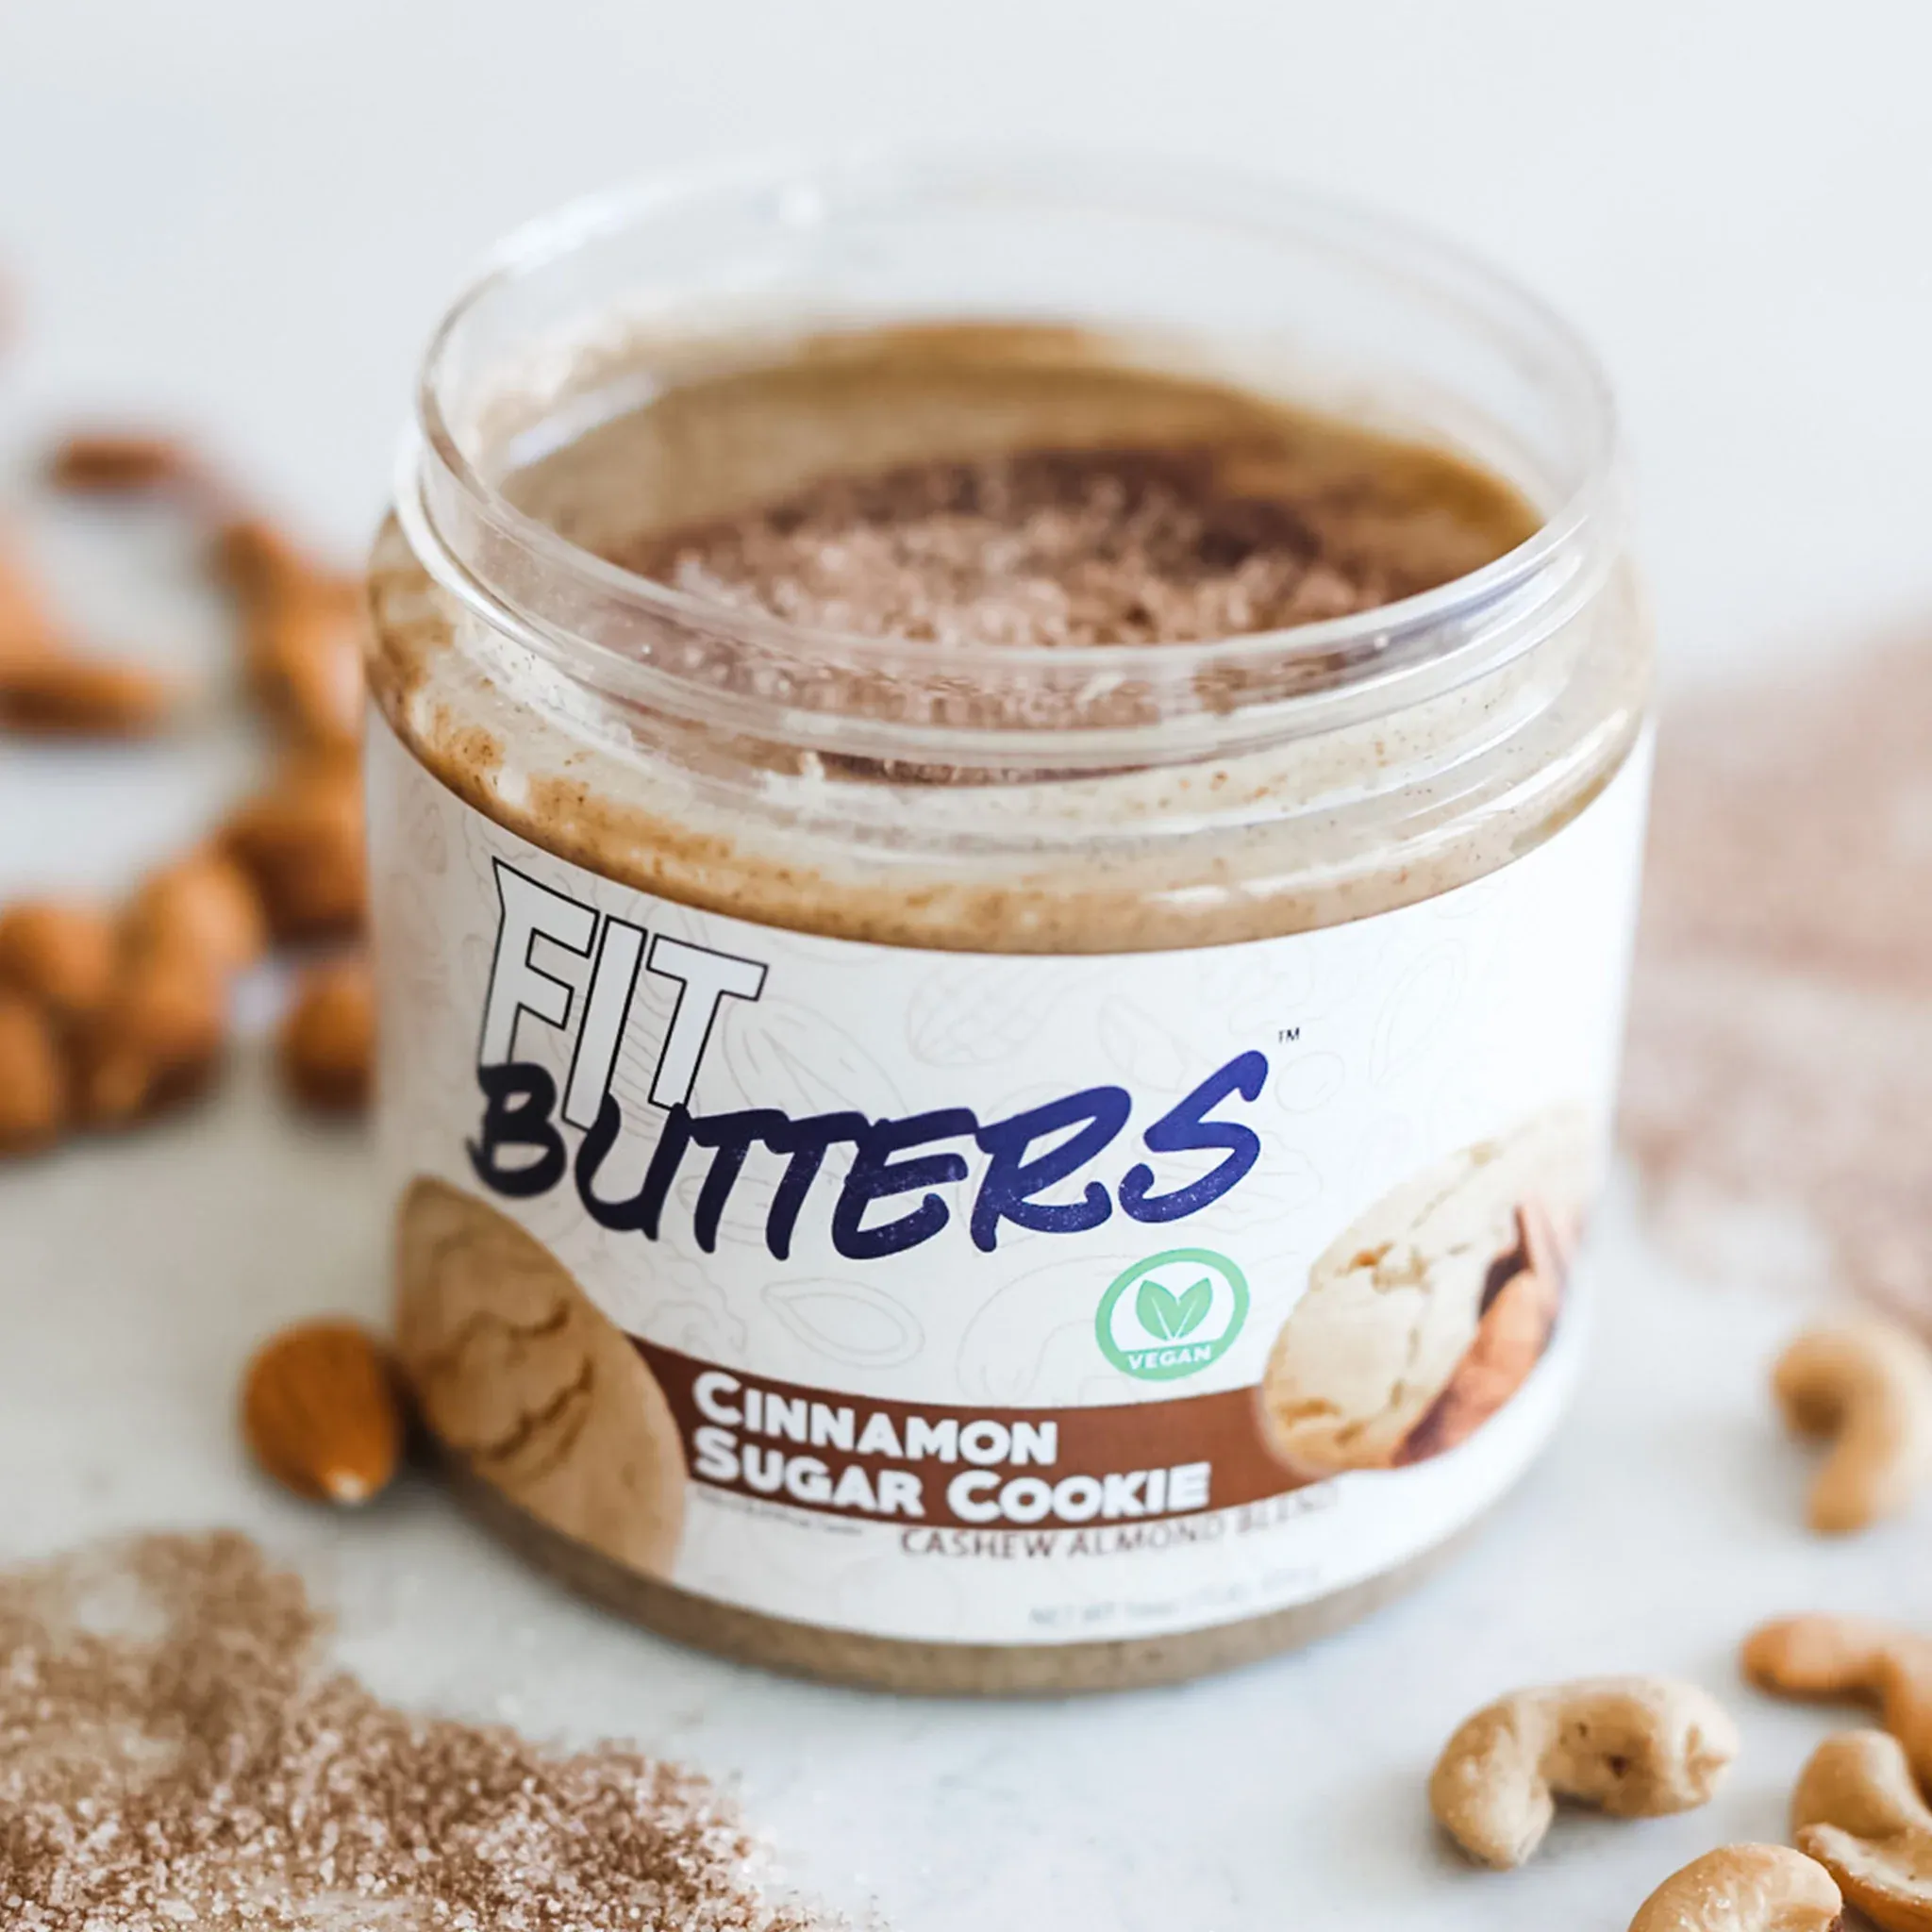 FIt Butters Cinnamon Sugar Cookie Cashew Almond Butter Image